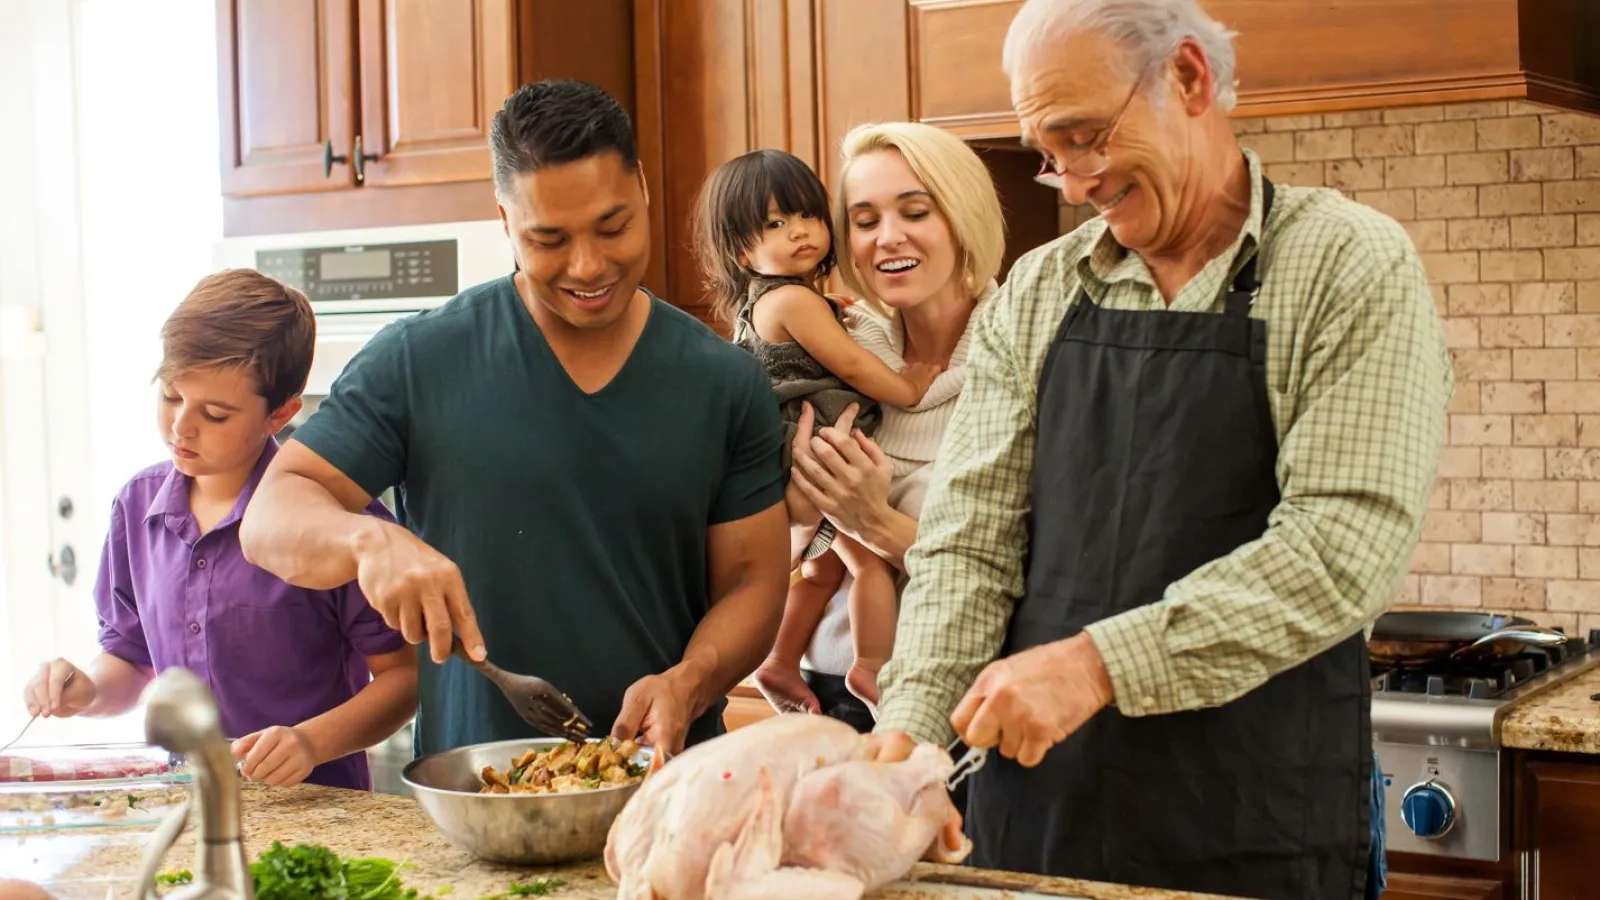 Family gathering for holidays using plumbing services